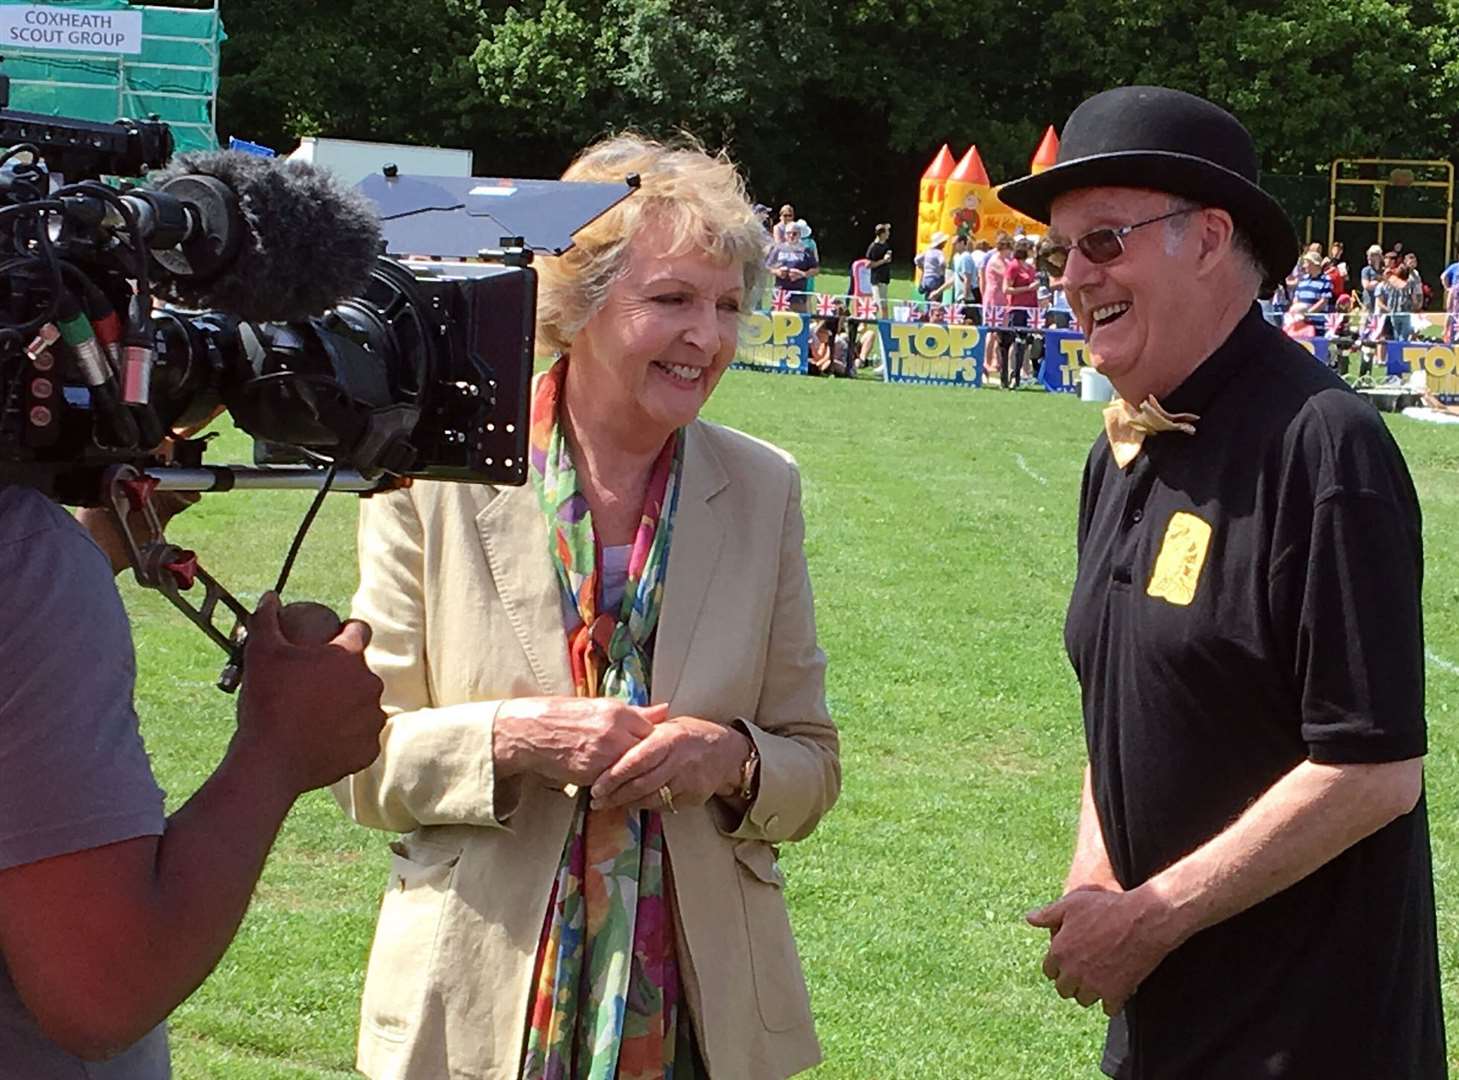 Penelope Keith interview Mike FitzGerald at the Coxheath Custard Pie Championships